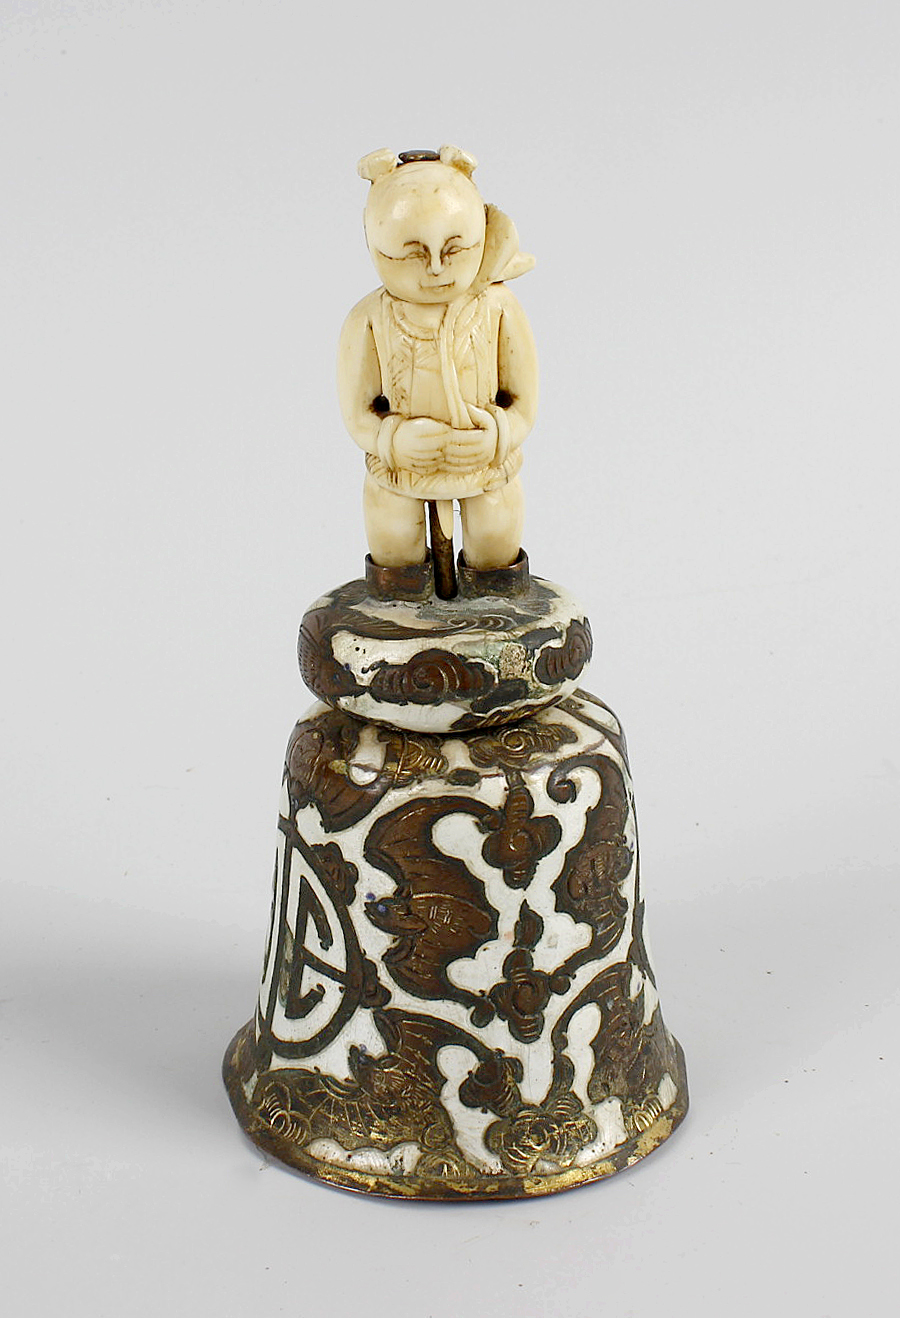 A late 19th century Chinese table bell, the enameled shaped bell engraved with a band of bats, and